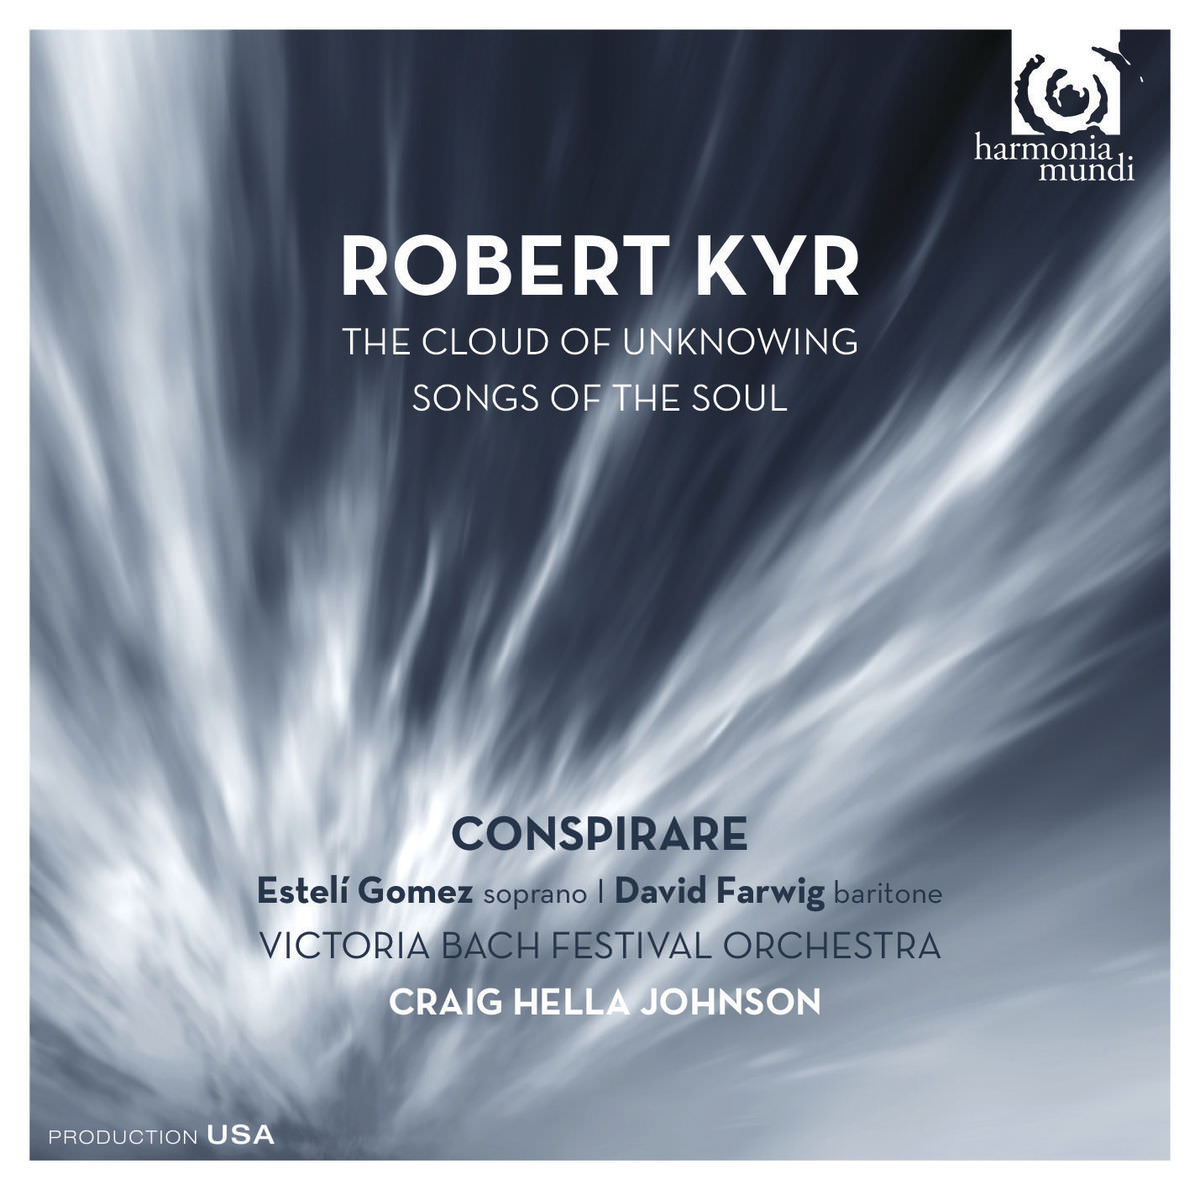 Craig Hella Johnson, Victoria Bach Festival & Conspirare - Robert Kyr: The Cloud of Unknowing - Songs of the Soul (2014) [Qobuz FLAC 24bit/88,2kHz]